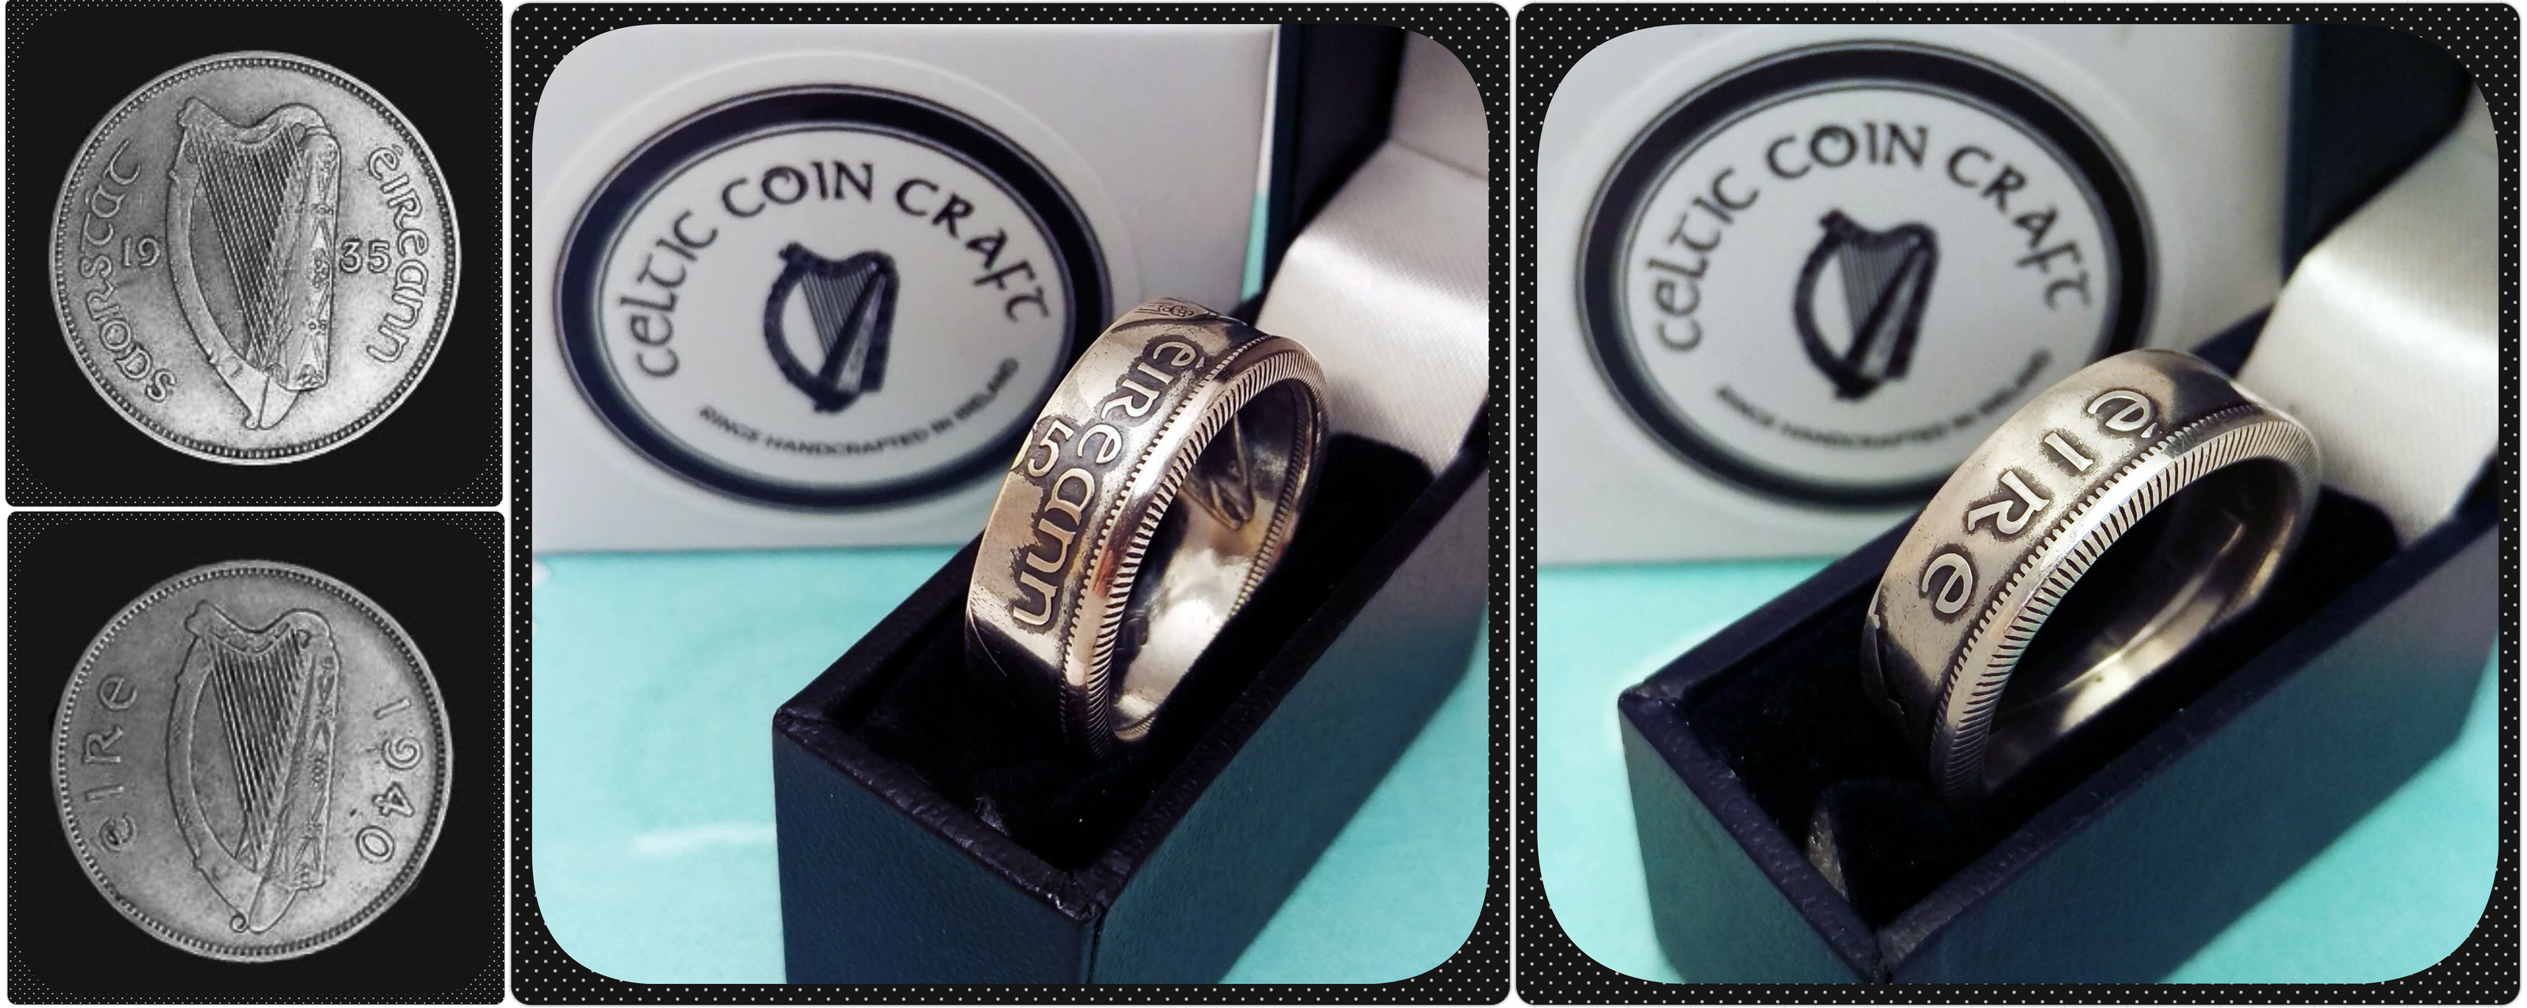 Two rings made from coins by Celtic Coin Craft